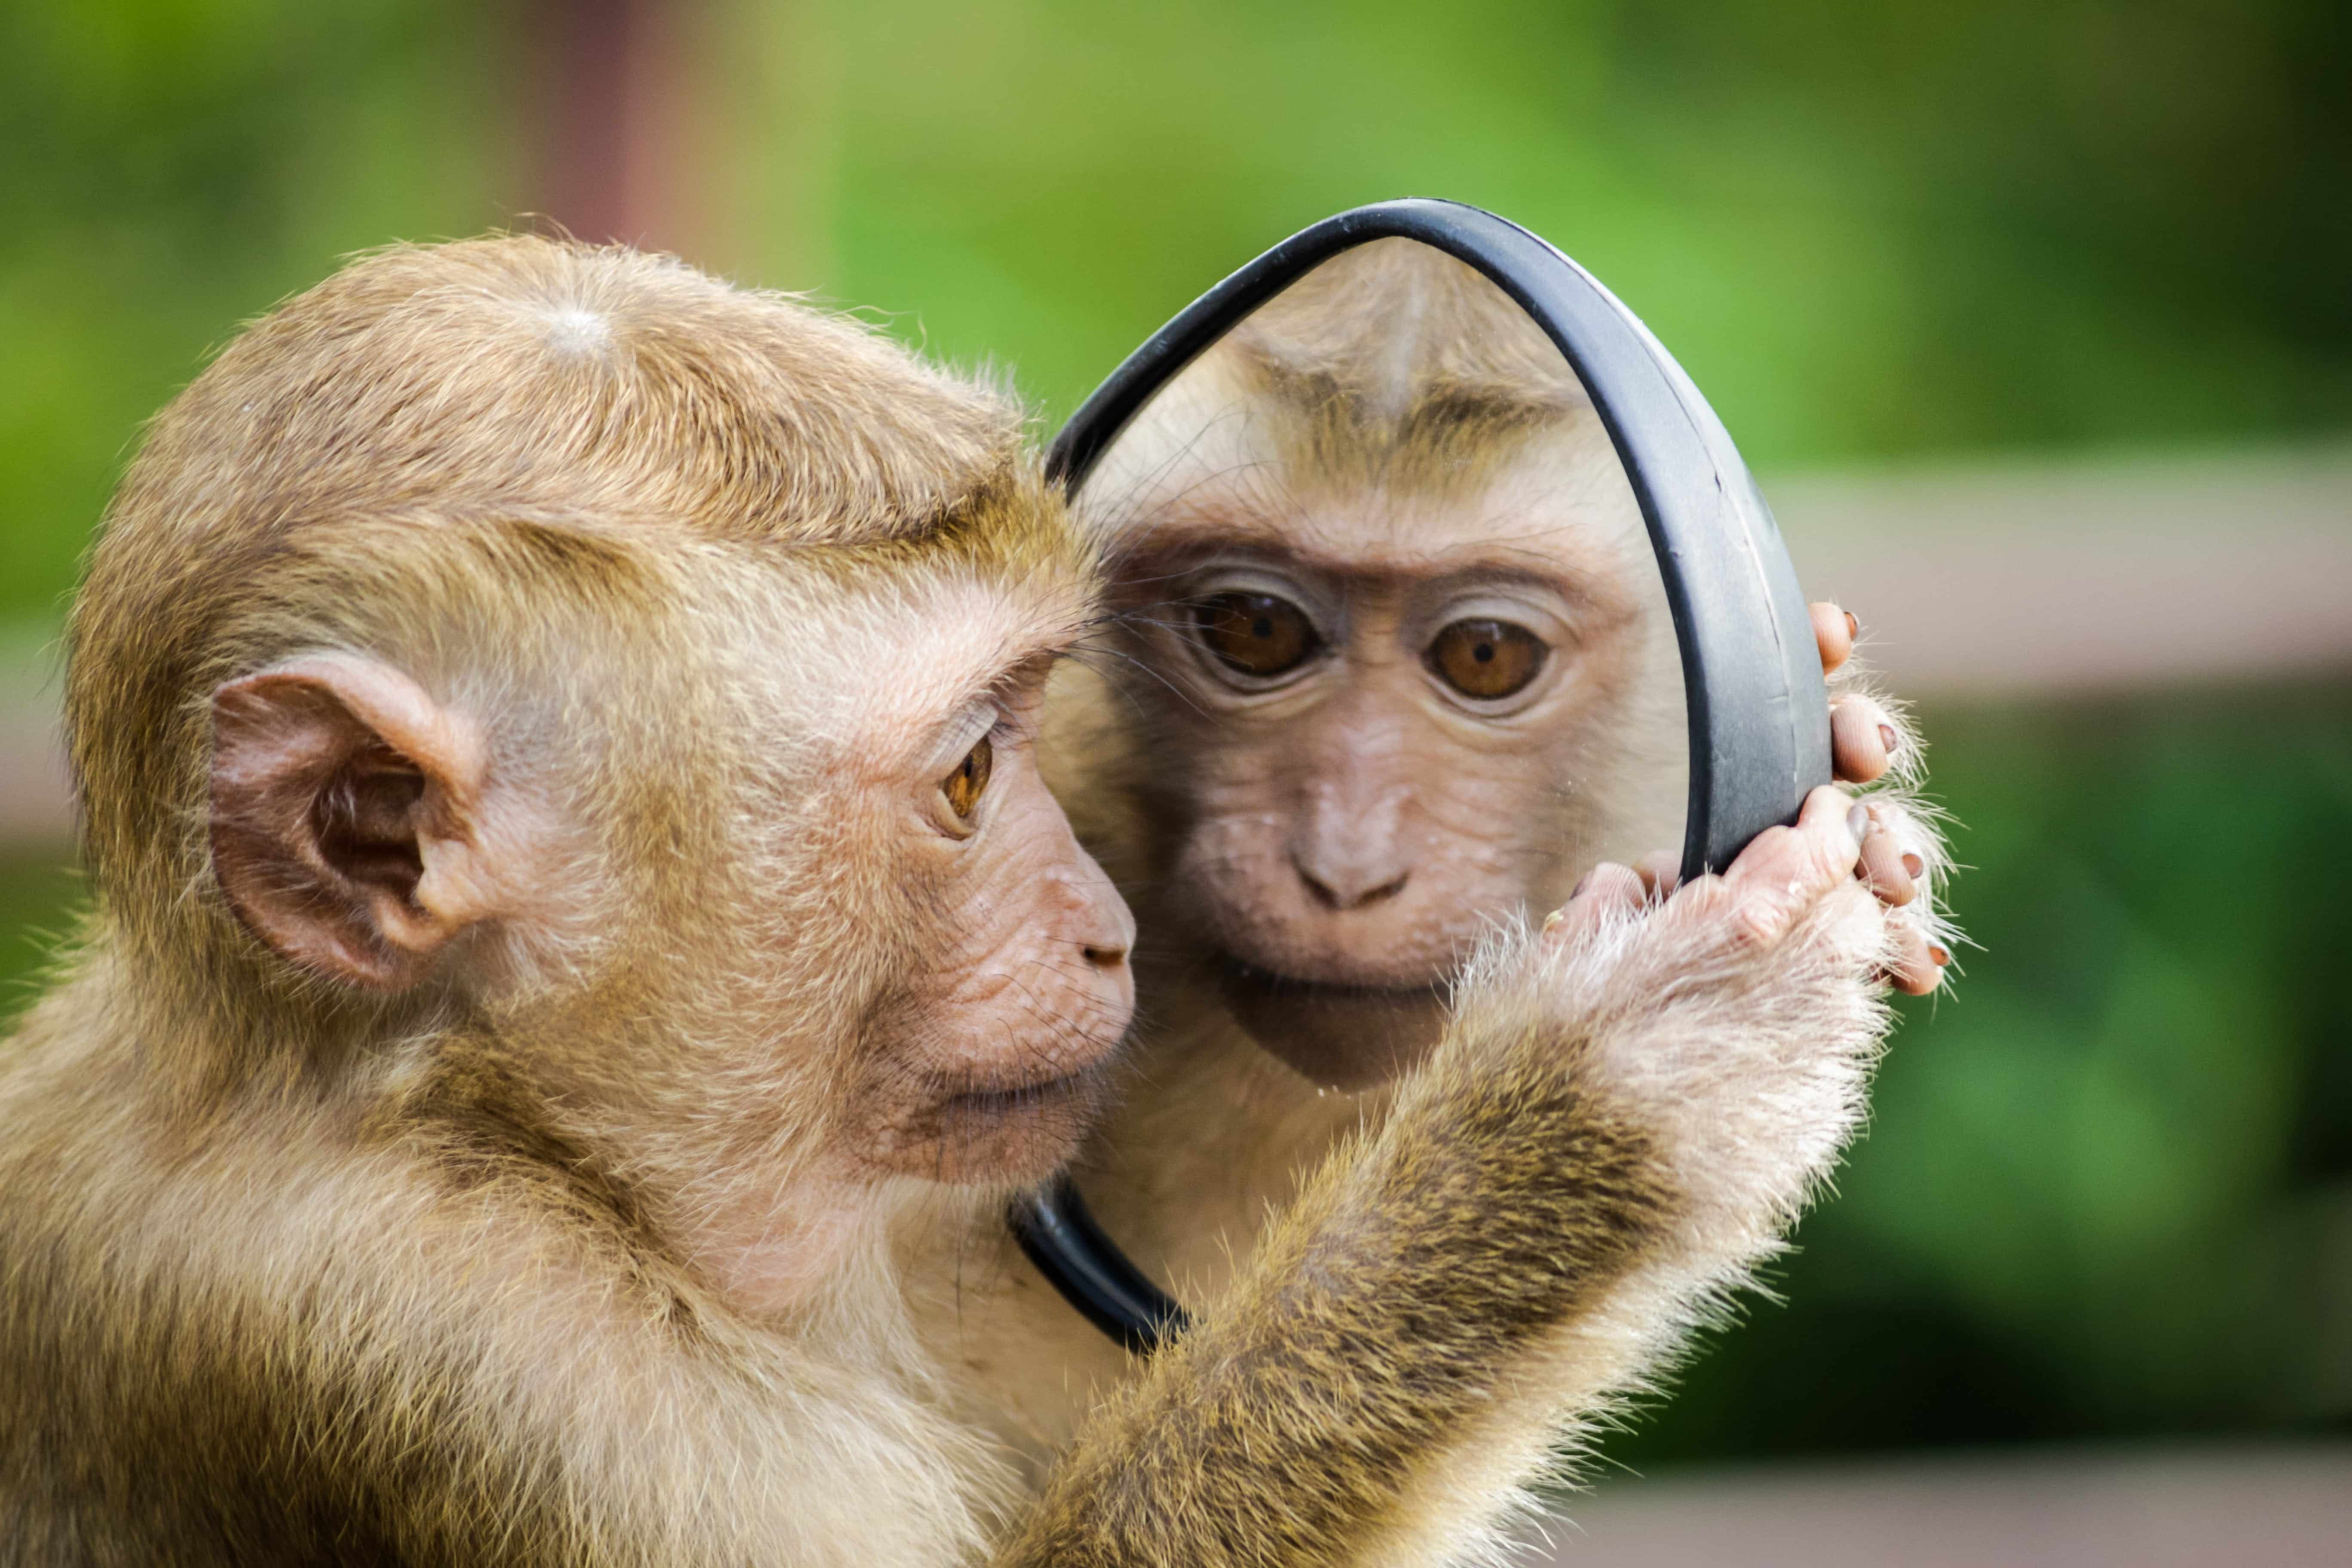 A monkey holds up a mirror to its face